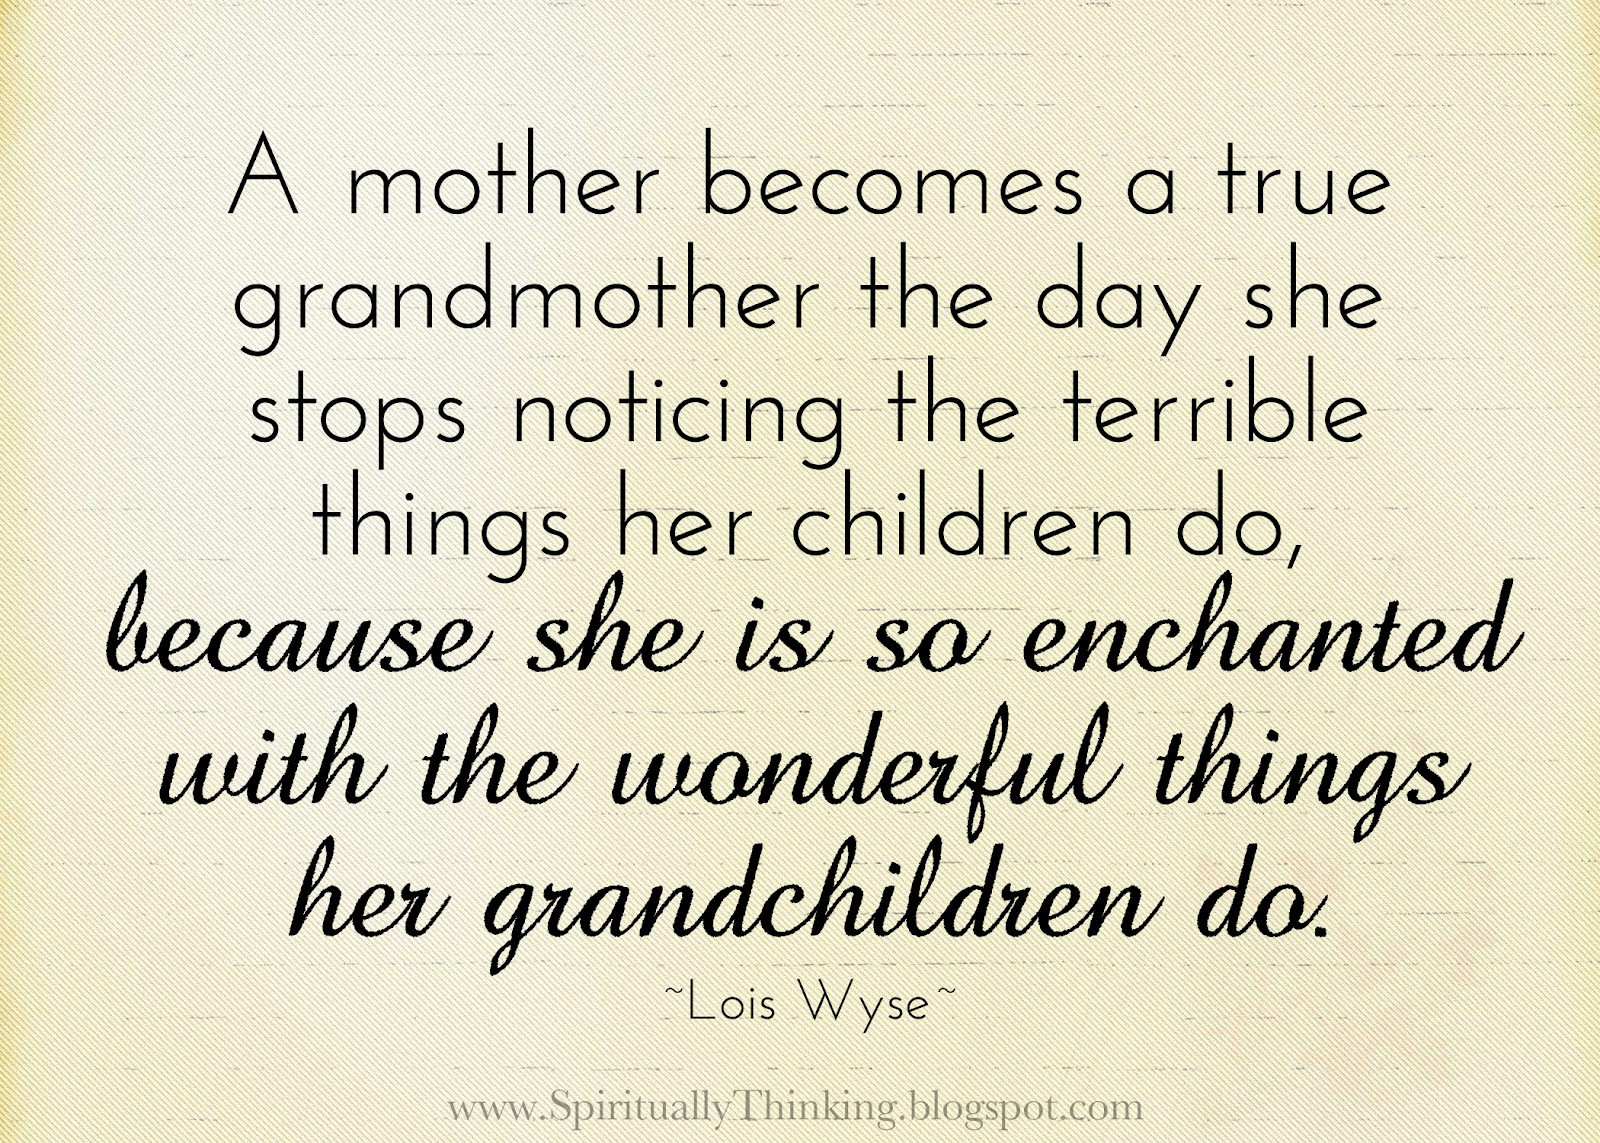 Grandmother Quote
 and Spiritually Speaking A True Grandmother